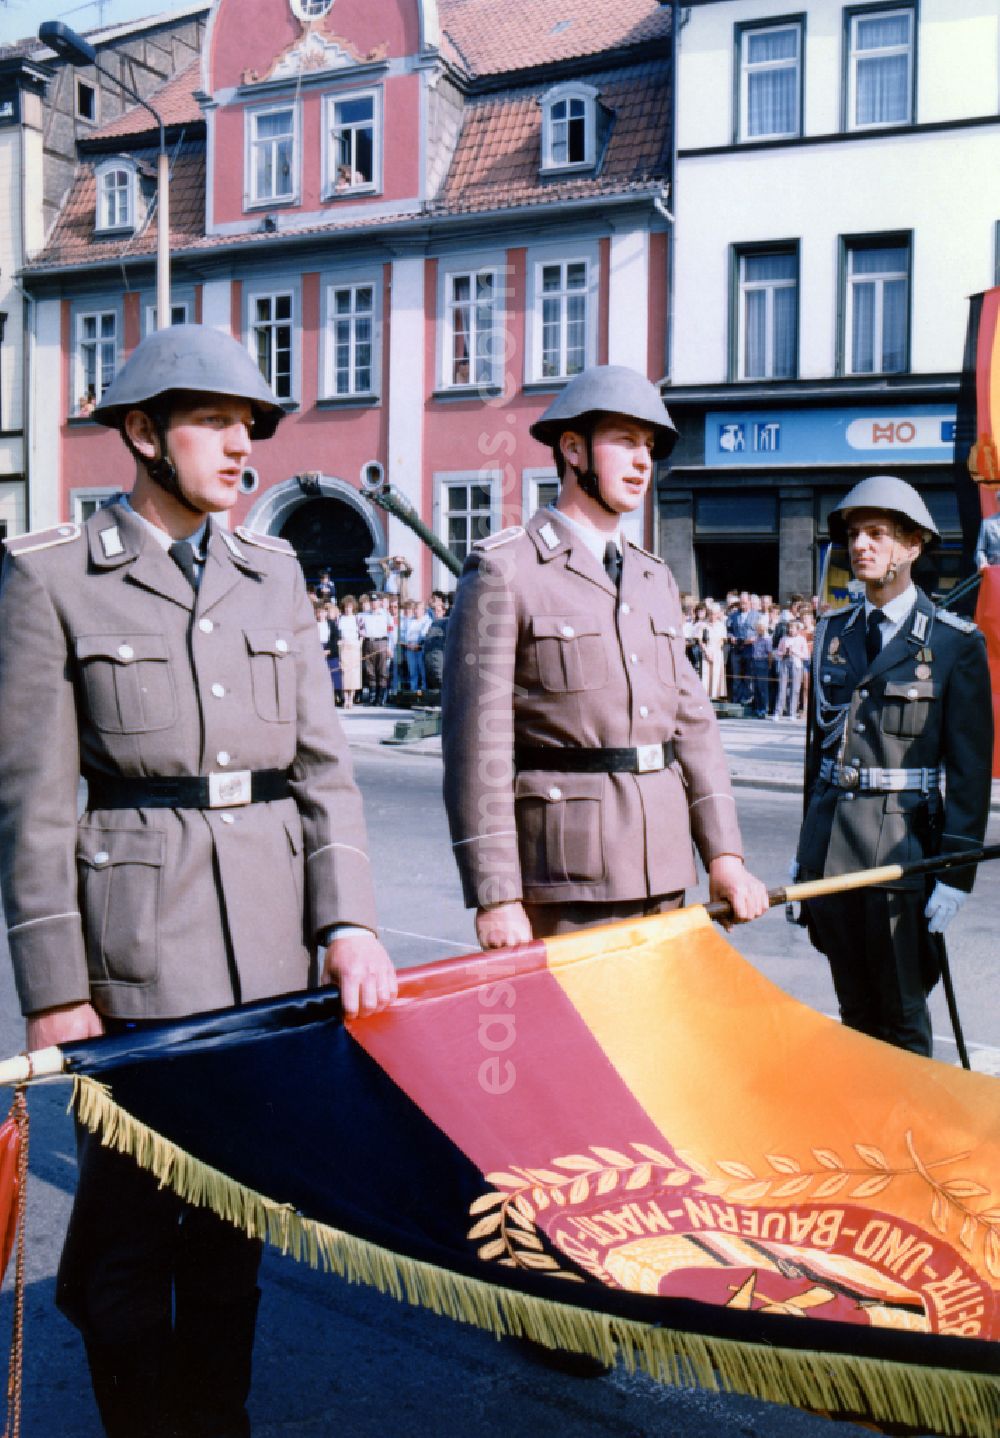 GDR image archive: Mühlhausen - Formation of soldiers and officers on the occasion of the ceremony to take the oath of allegiance to the NVA National People's Army on Wilhelm-Pieck-Platz in Muehlhausen in the state of Thuringia on the territory of the former GDR, German Democratic Republic